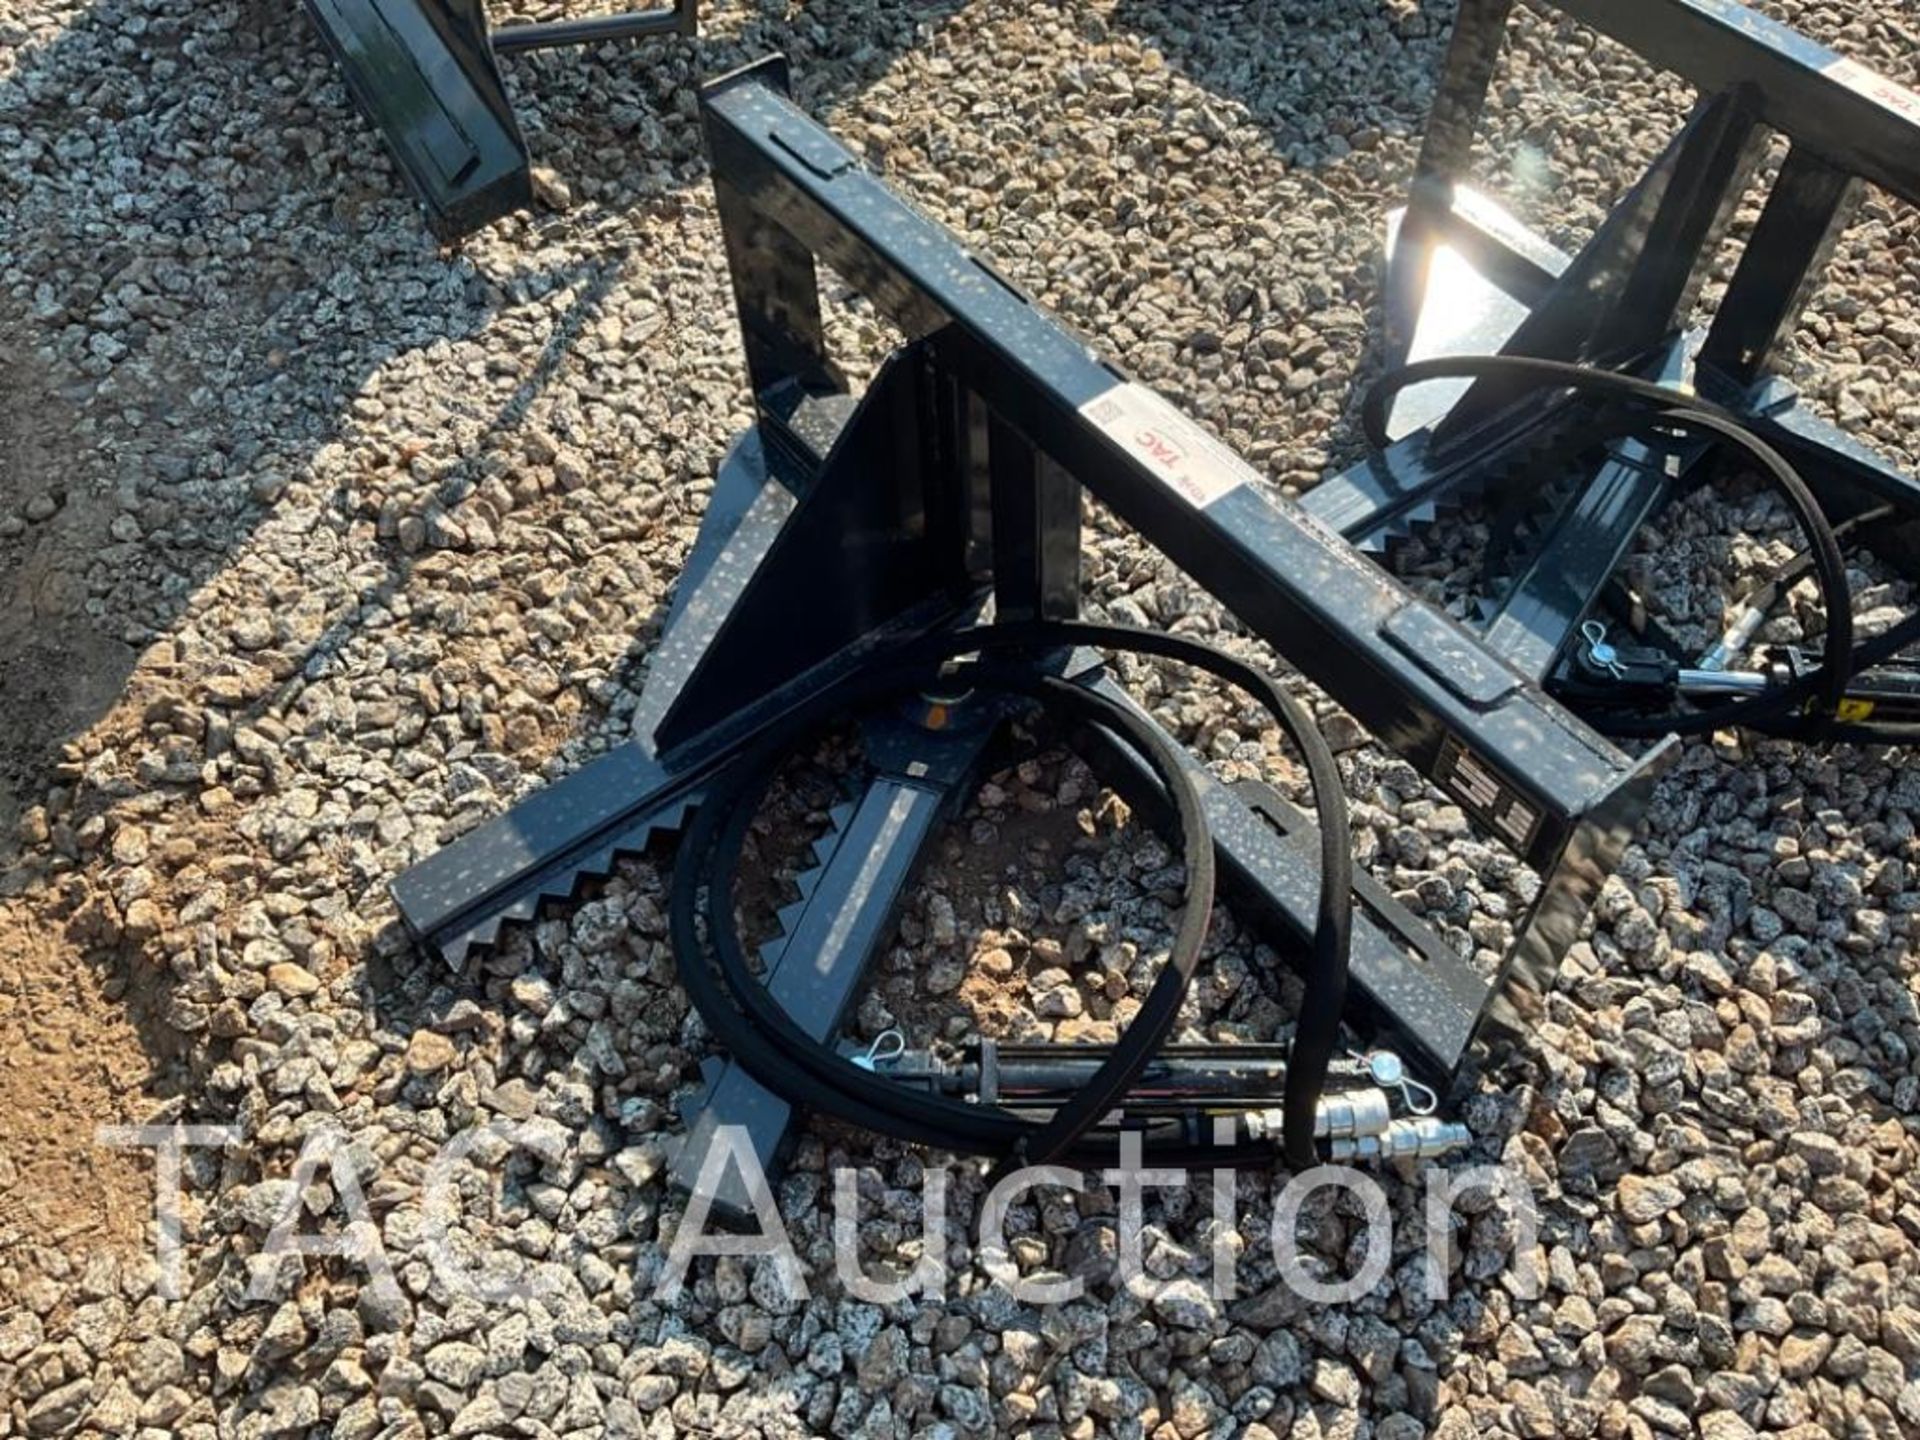 New 2023 LandHonor Post Puller Skid Steer Attachment - Image 2 of 4